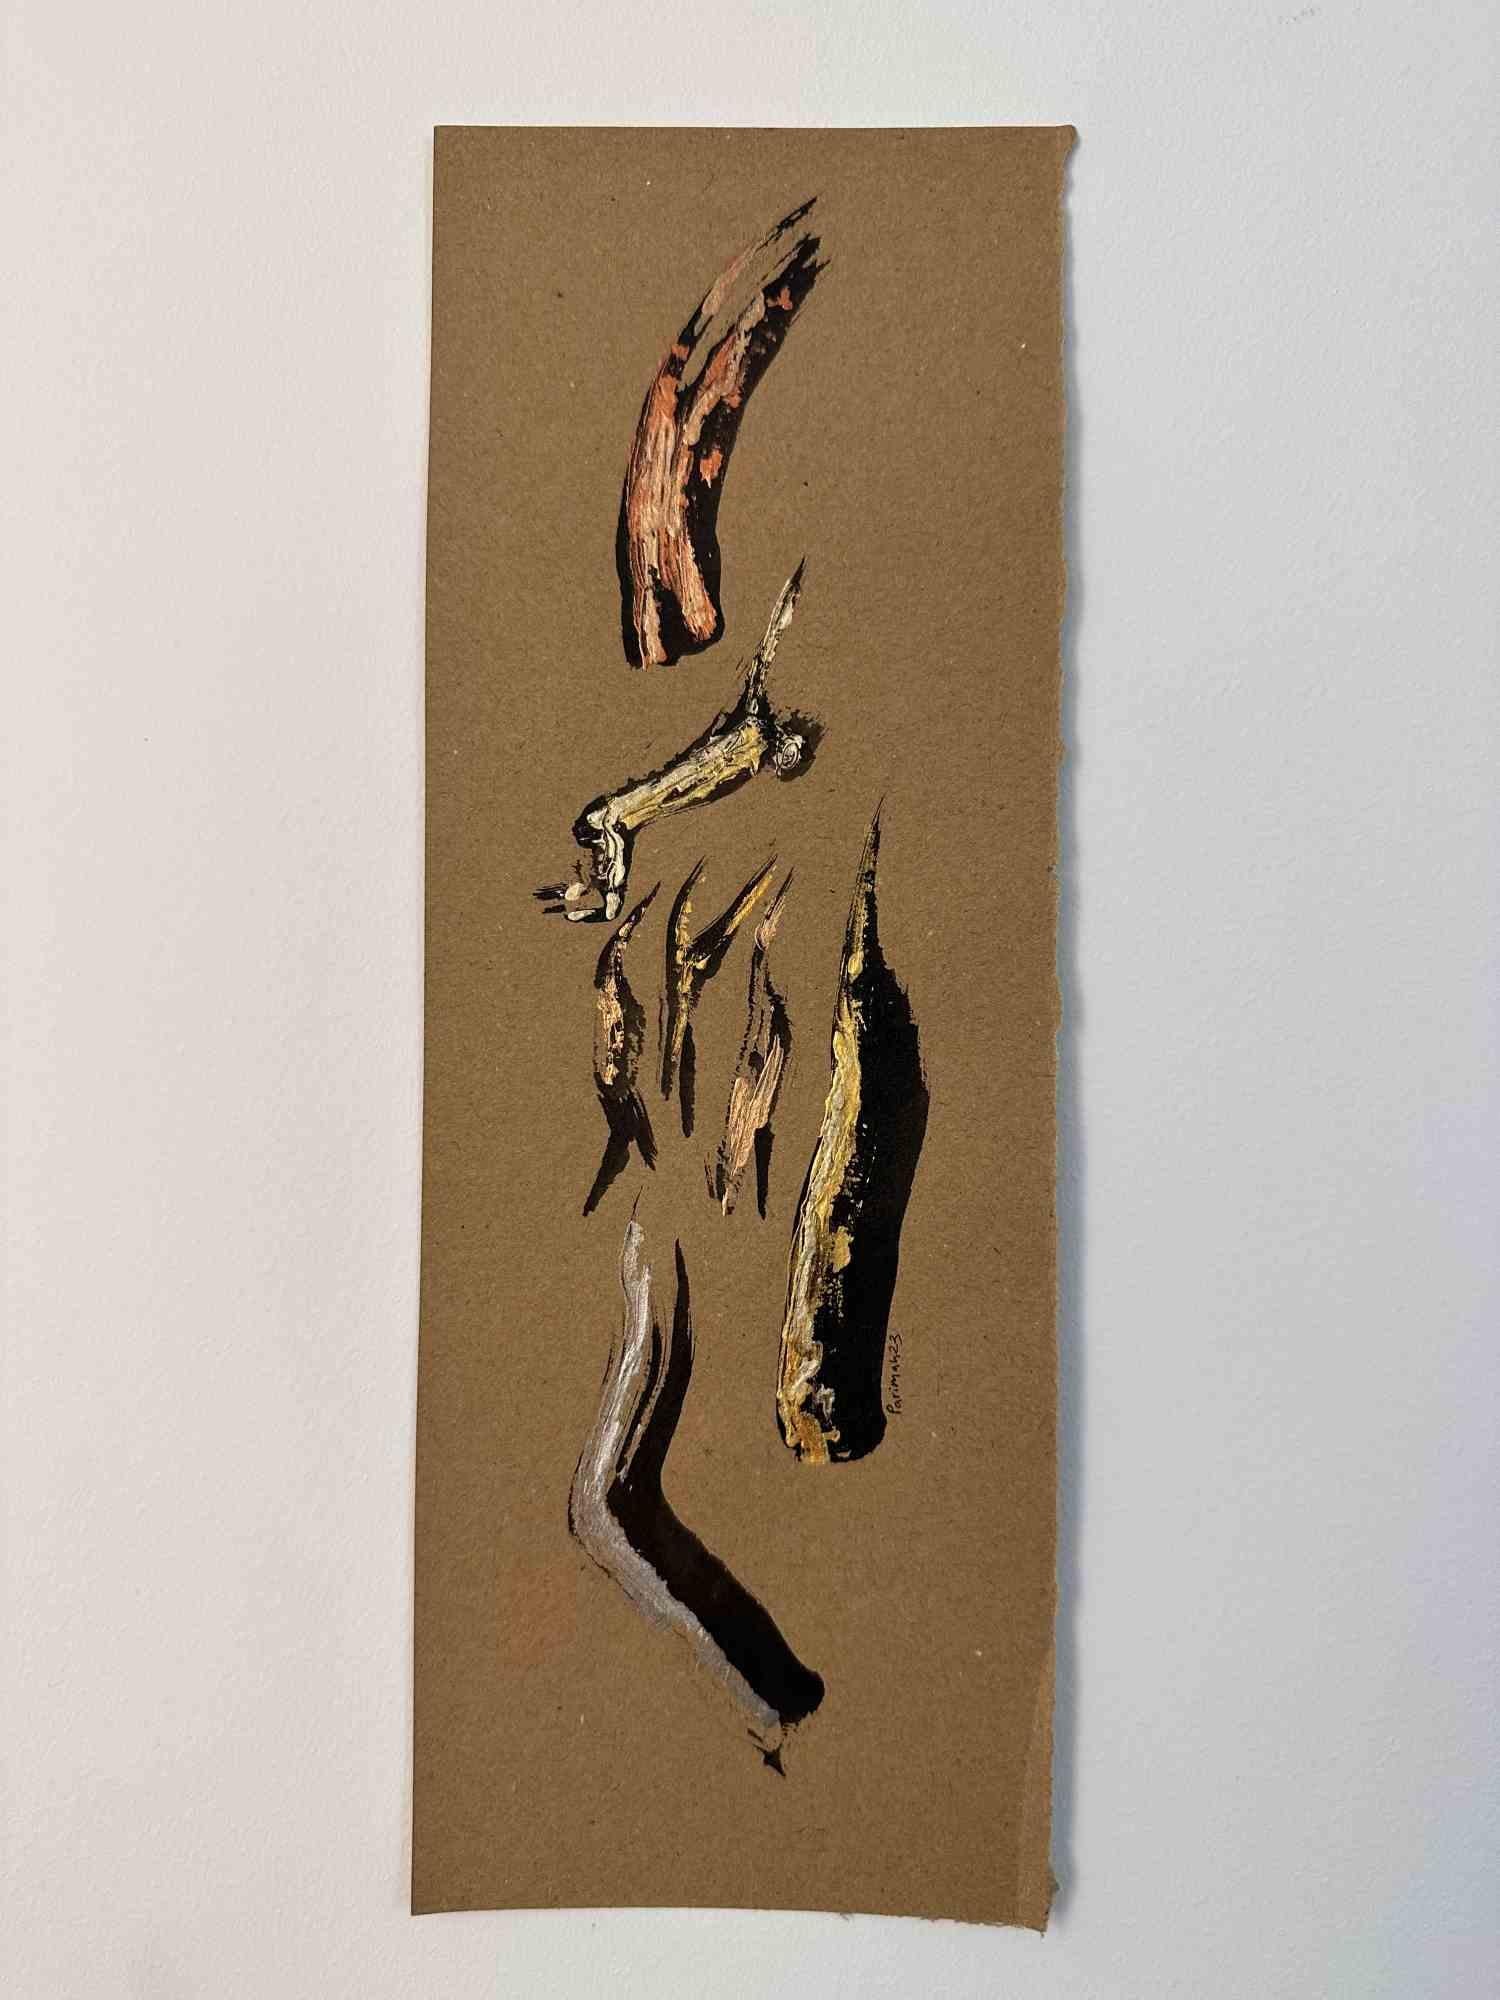 Golden Song of Revolution is a drawing realized by Iranian Painter and Poet Parimah Avani in 2023.

Sumi, Persian ink, and acrylic on kraft paper.

Song of Freedom in Copper Color is a drawing realized by Iranian Painter and Poet Parimah Avani in